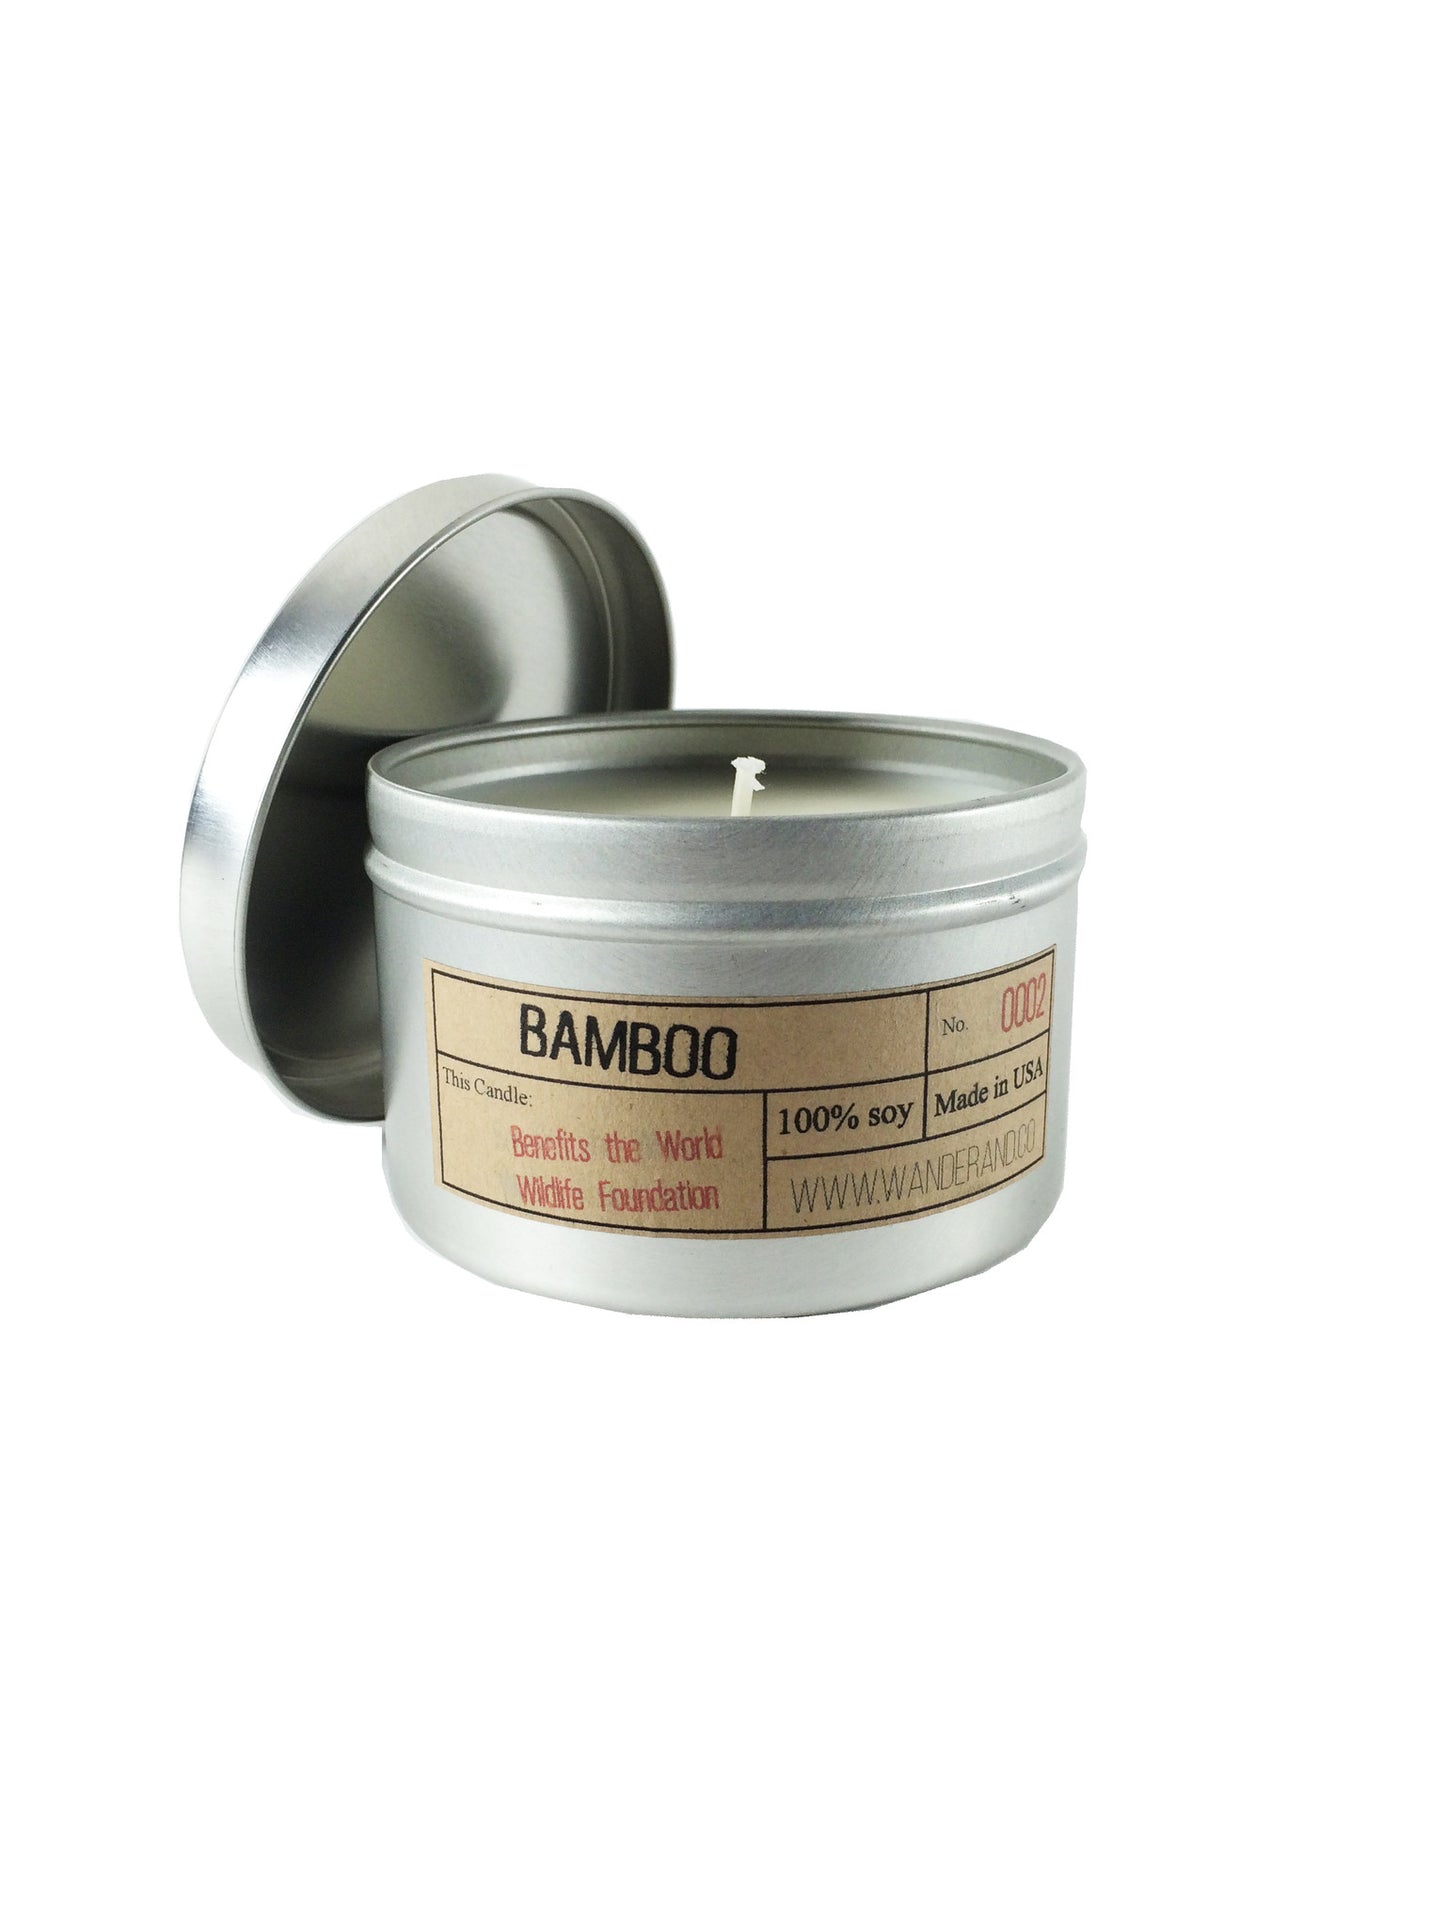 Wander & Co. "Bamboo" Candle